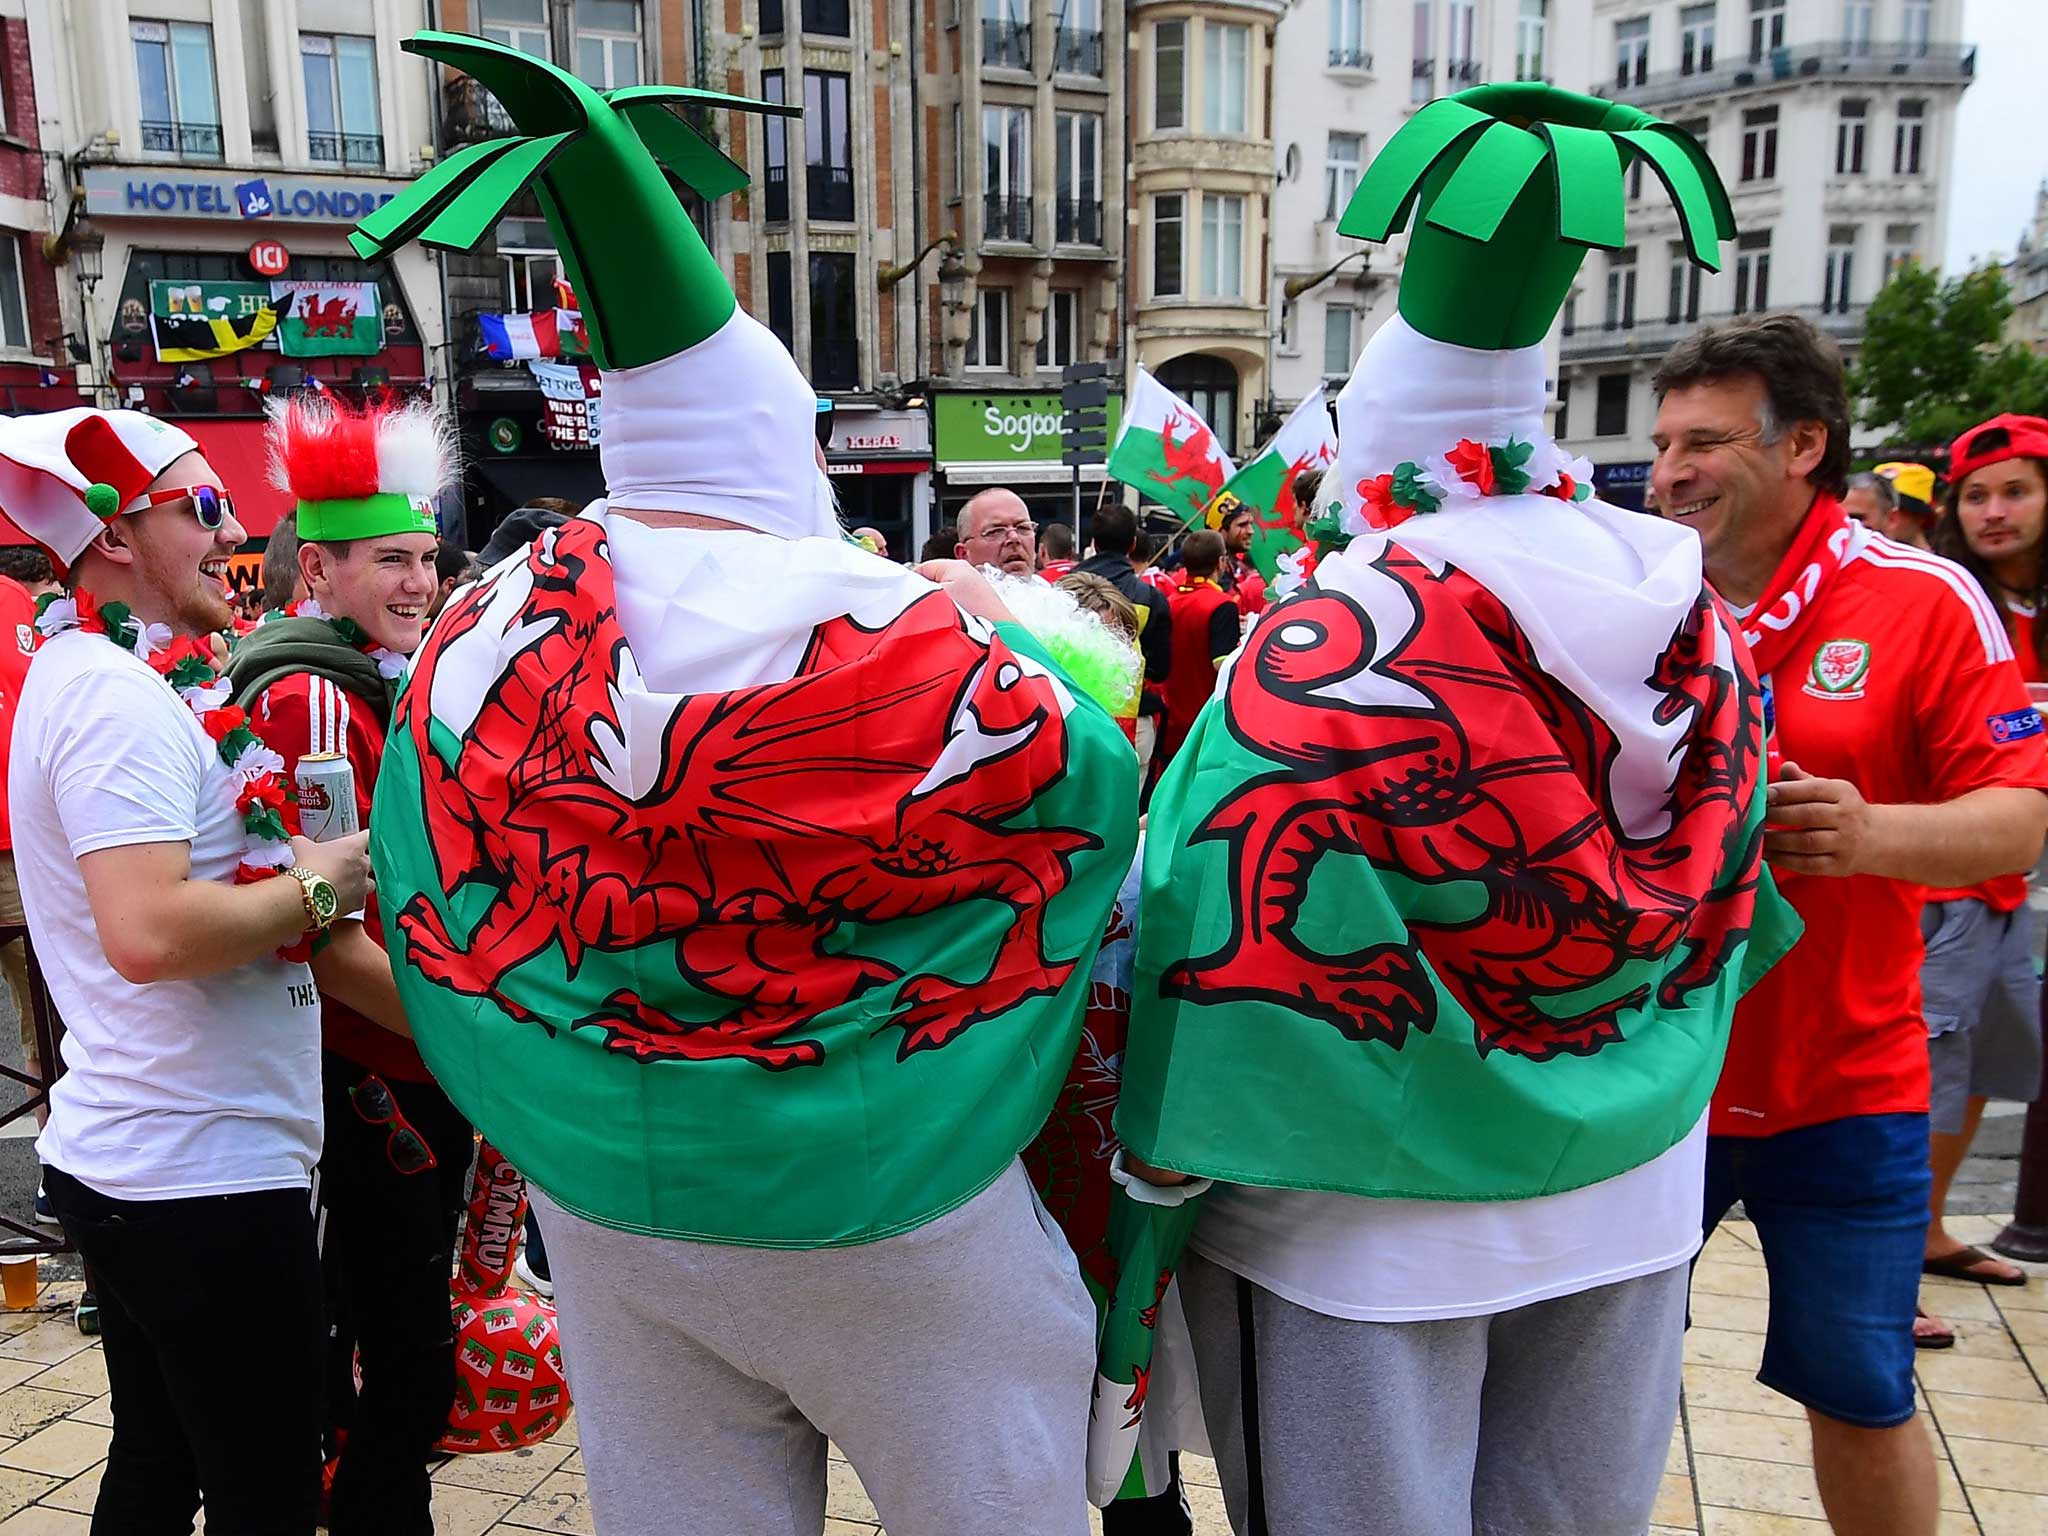 Some of the lucky Wales supporters who made it to France